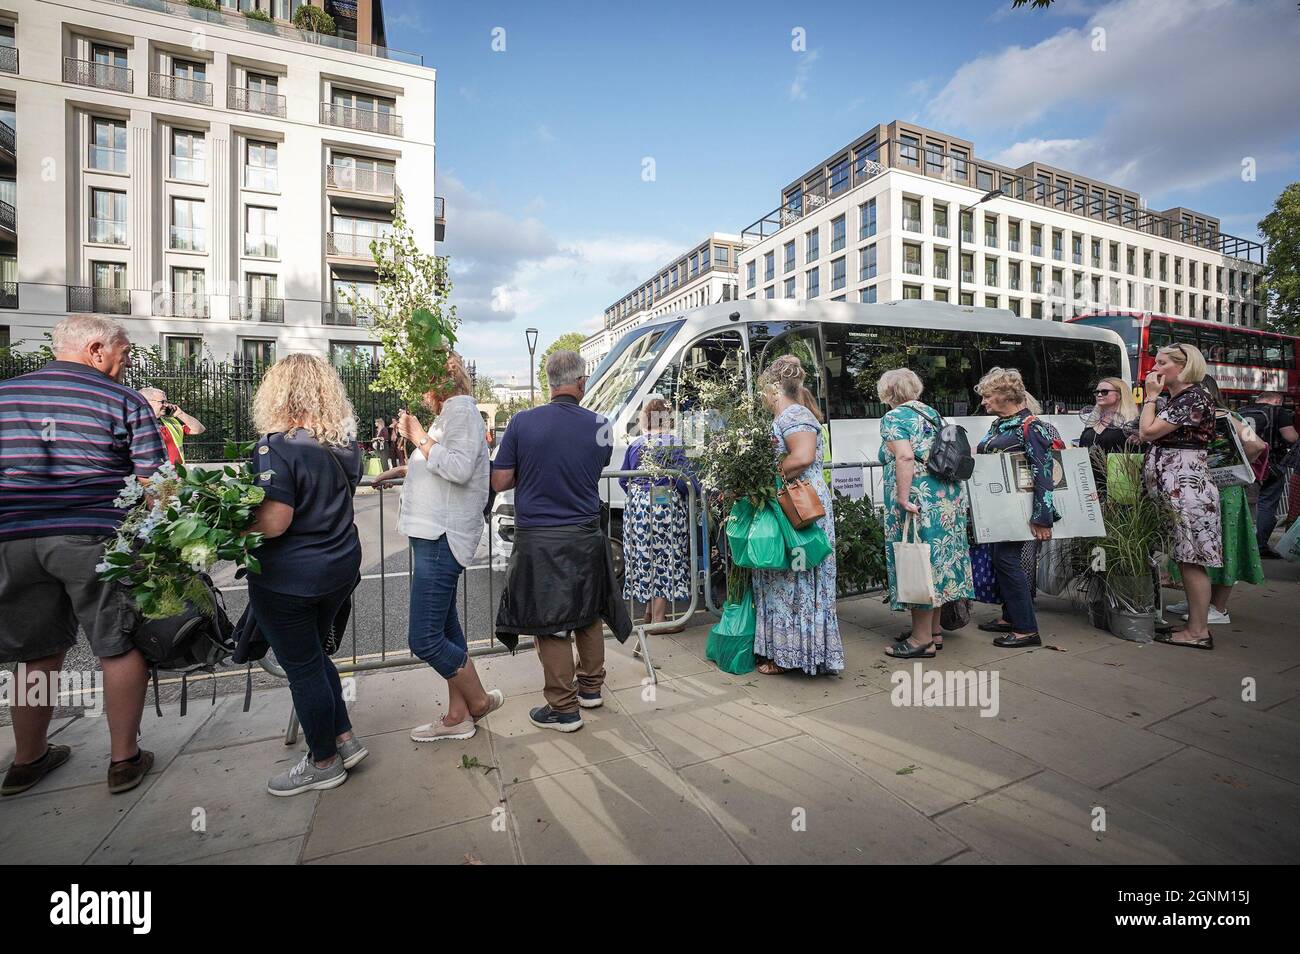 London, UK. 26th September 2021. Chelsea Flower Show plant sell-off. Plant bargains are swiftly carried away on the final day of RHS Chelsea Flower Show - which sees many exhibitors selling off their plants to the public at knock-down prices. Credit: Guy Corbishley/Alamy Live News Stock Photo